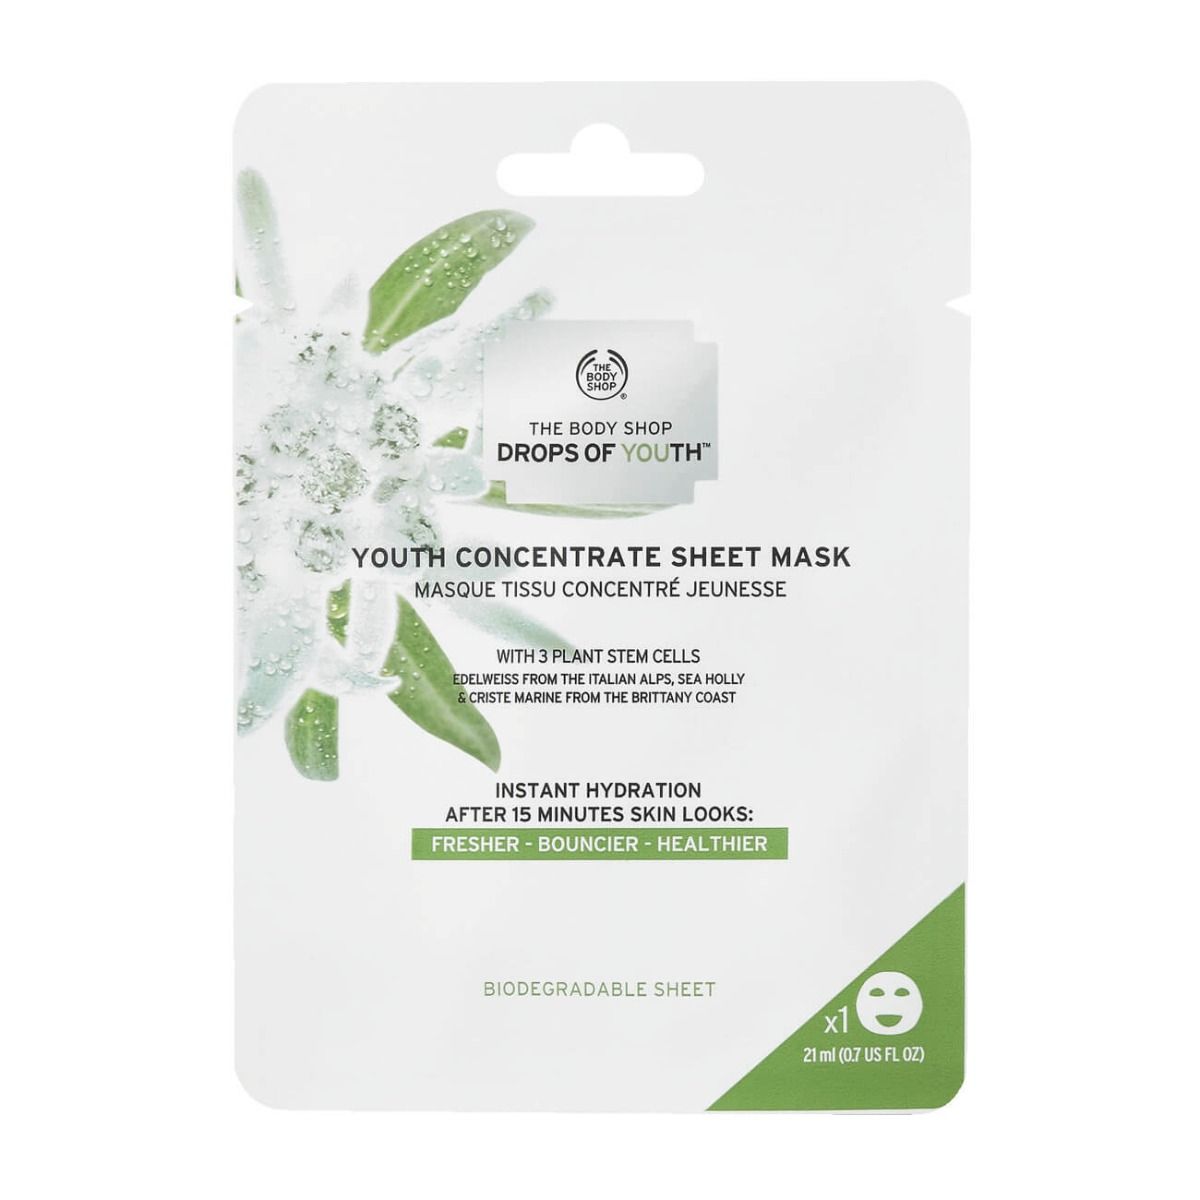 The Body Shop Drops of Youth™ Youth Concentrate Sheet Mask (21 ml x1) The Body Shop